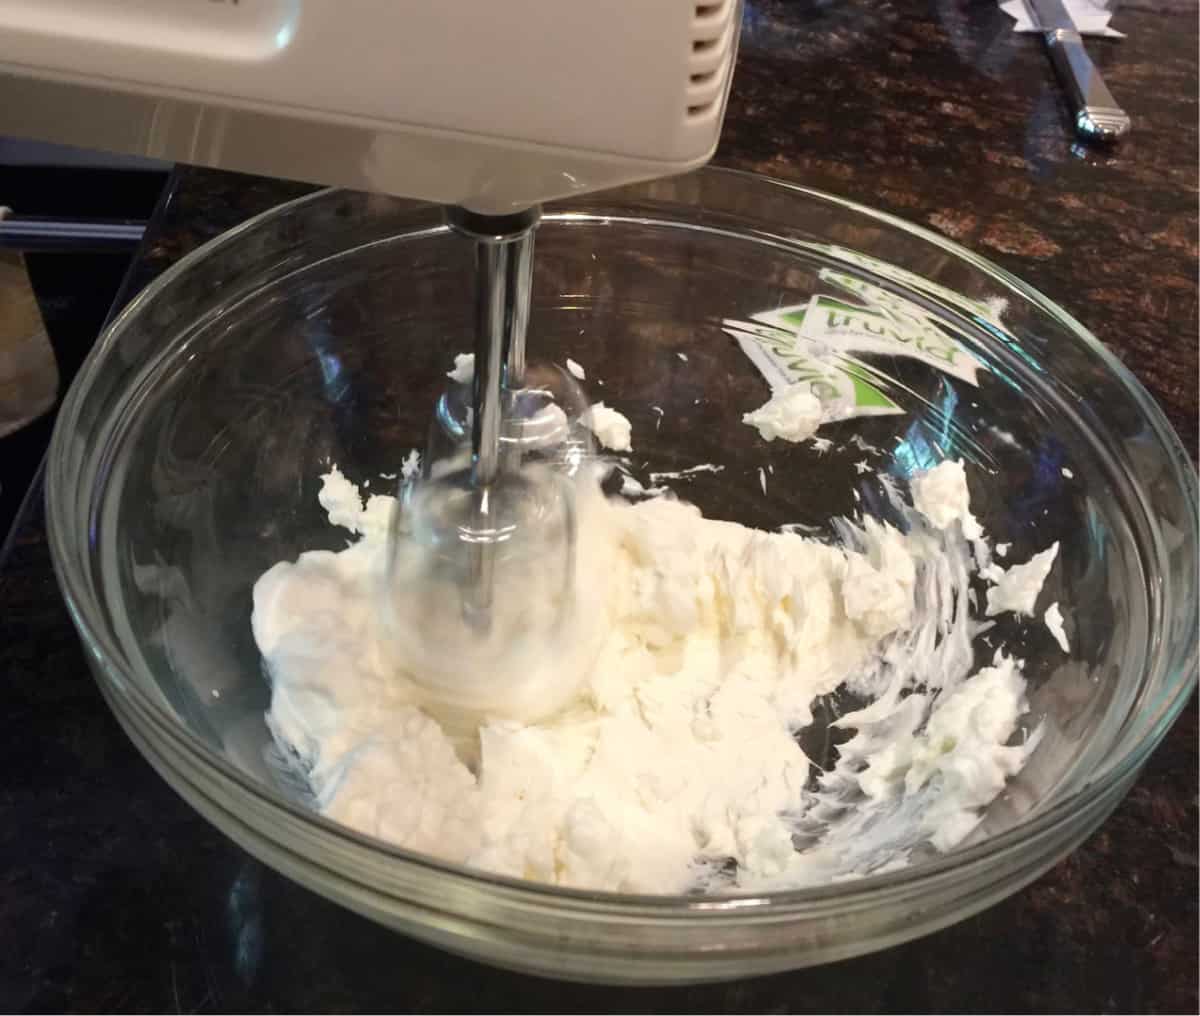 Beating cream cheese and sweetener in glass bowl with hand mixer.